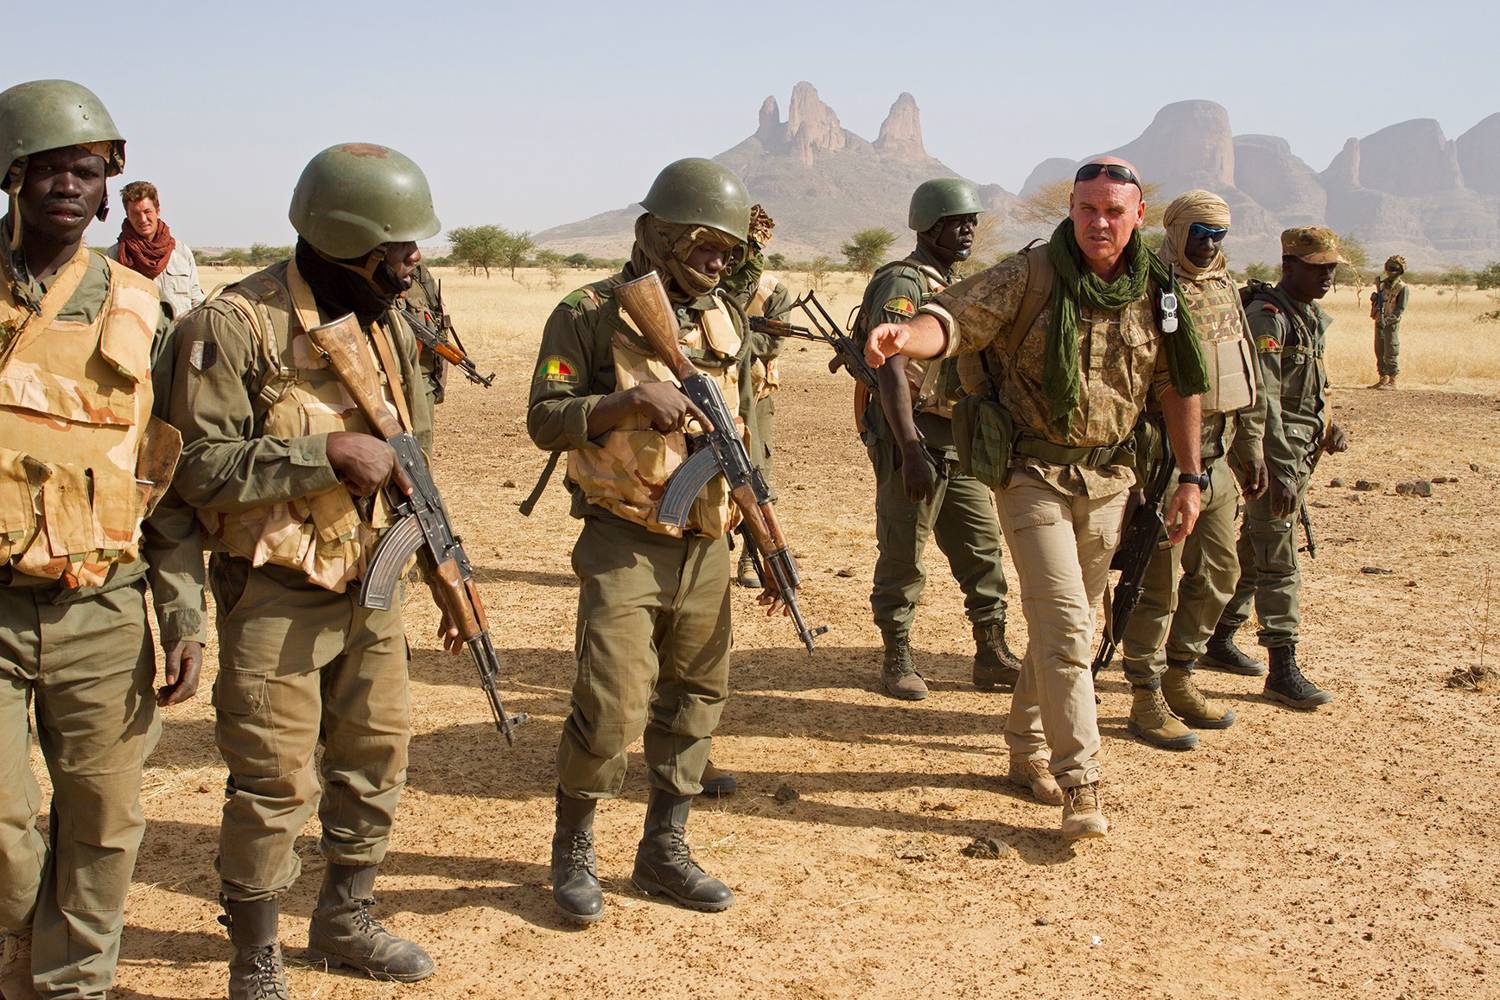 Rory Young, the principal trainer from Chengeta Wildlife trains local rangers and Malian armed forces in the Gourma region. Photo: Nigel Kuhn, Chengeta Wildlife